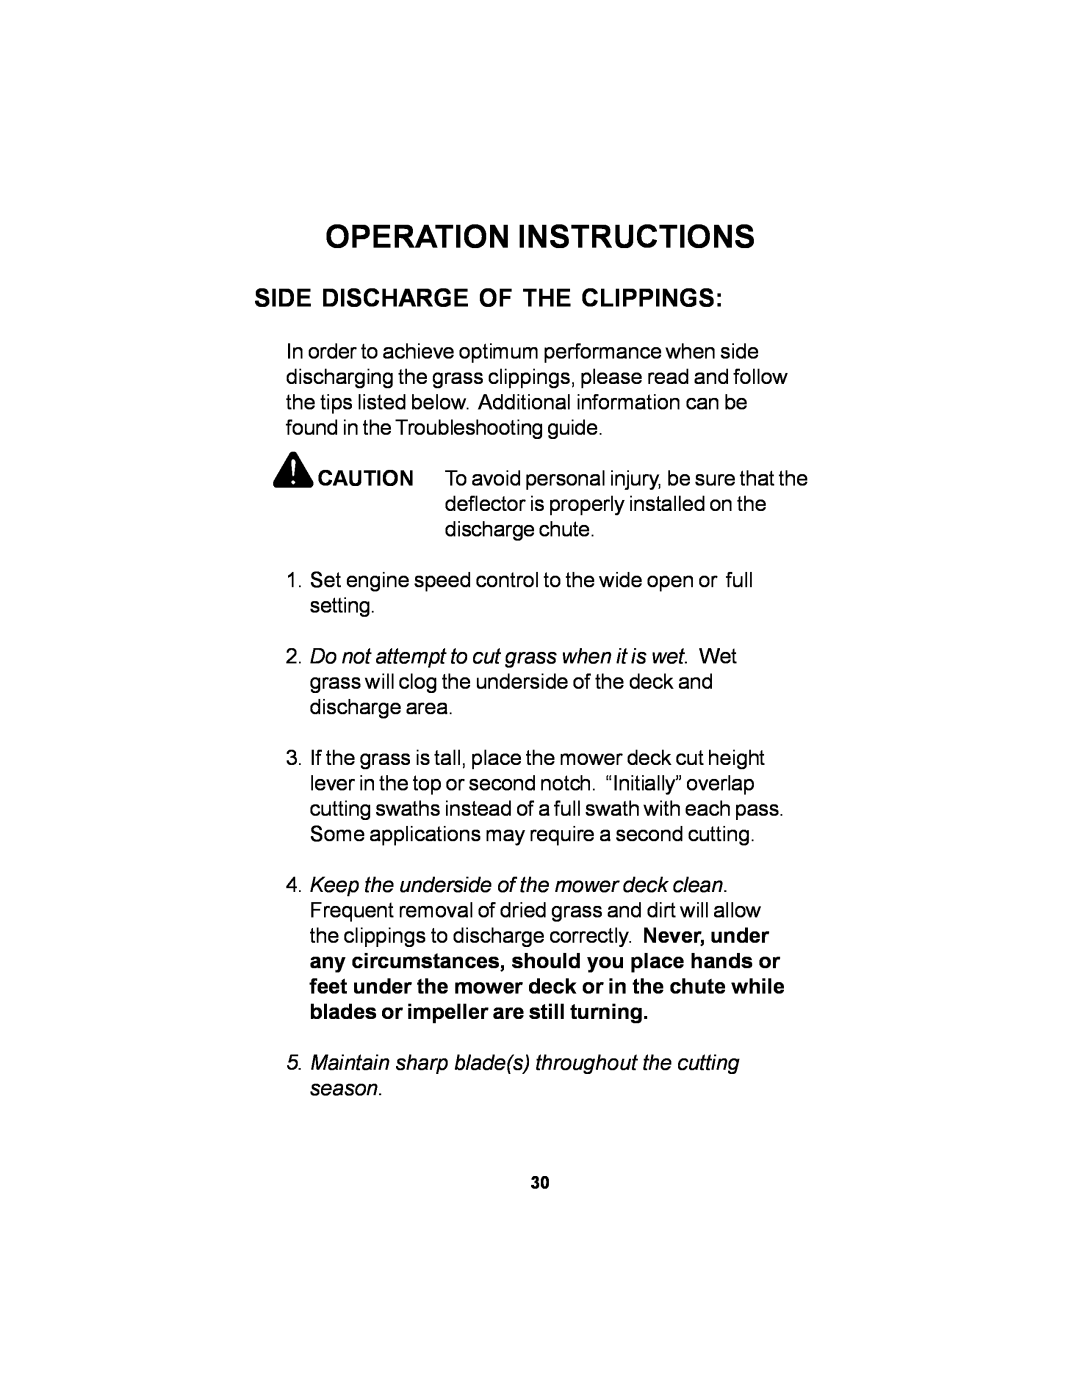 Dixon 14295-1005 manual Side Discharge Of The Clippings, Operation Instructions 